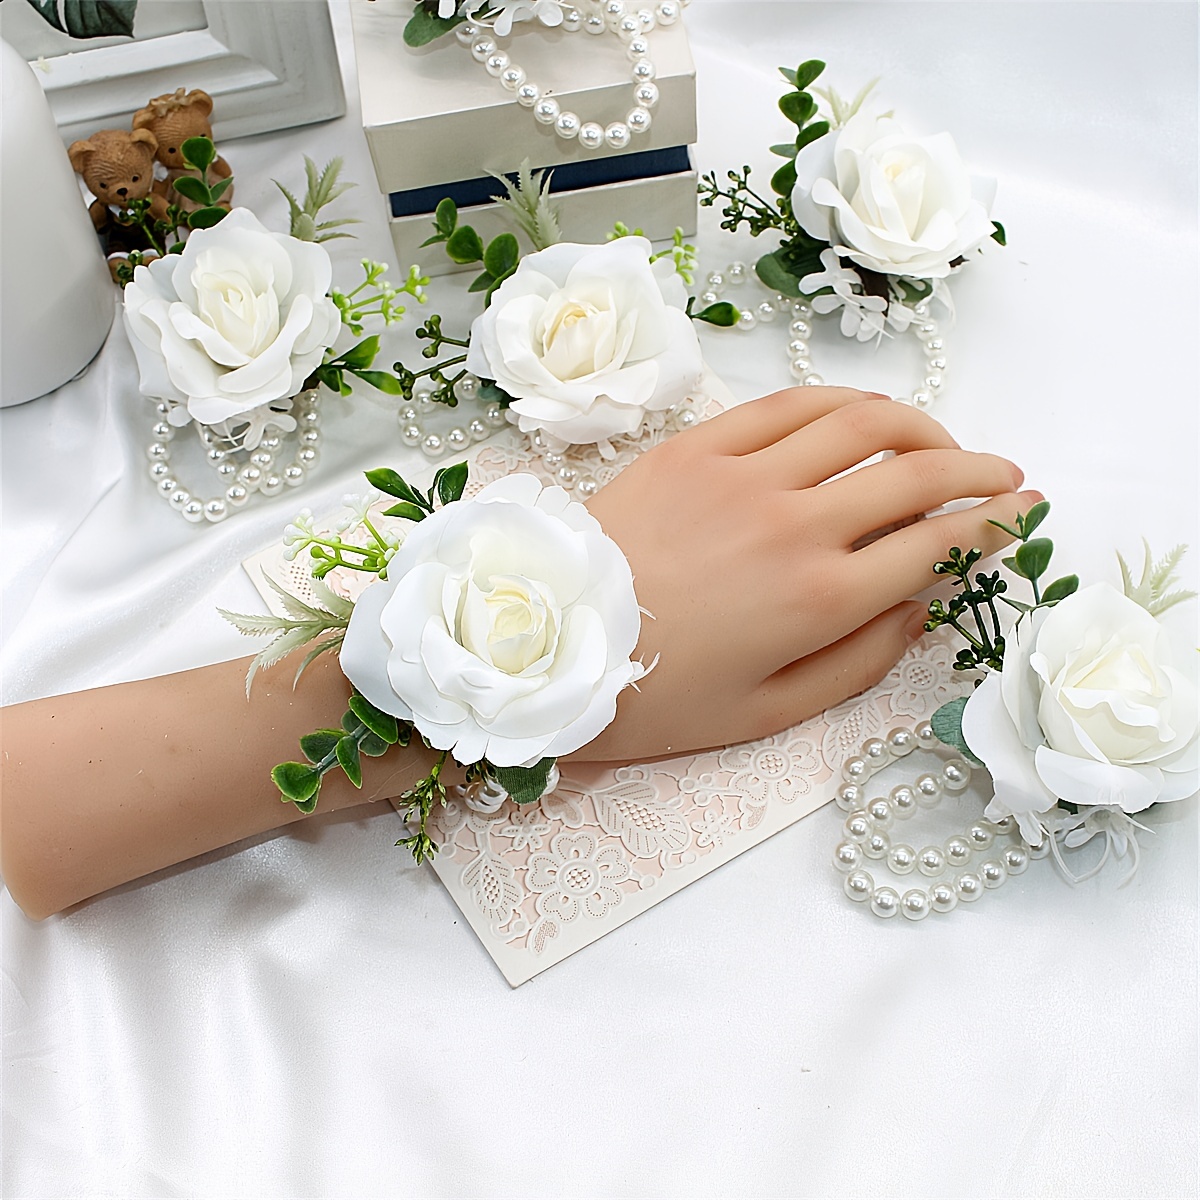 White Rose Wrist Corsages for Wedding 2pcs Pearl Wrist Corsage Bracelet  Wedding Bridal Bridesmaid Hand Flower for Wedding Festival Party Prom Suit  Homecoming Decoration Corsage 